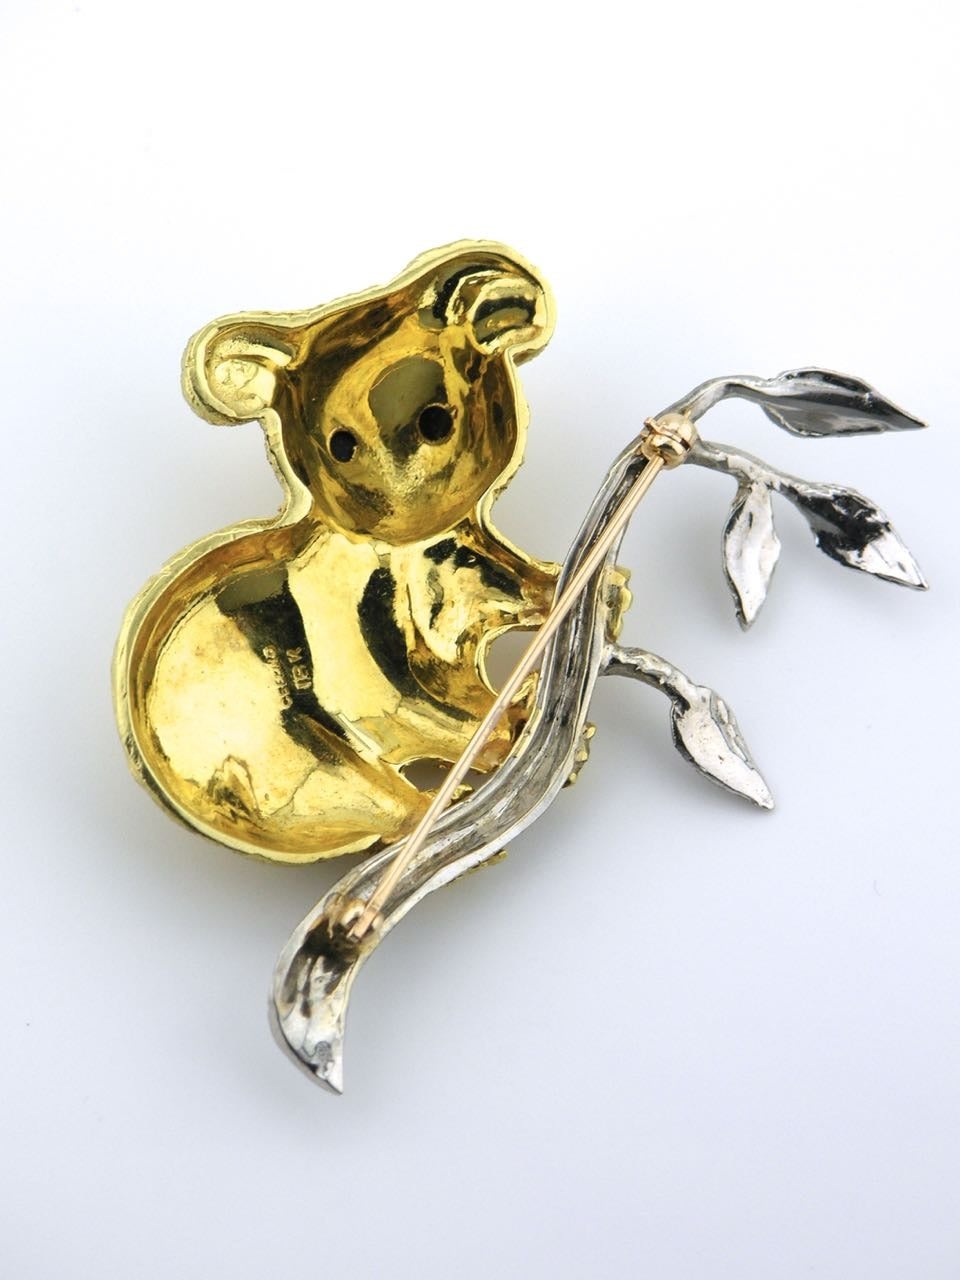 An 18kt yellow and white gold Koala pin - a yellow gold Koala with onyx eyes sitting on a white gold branch with leaves 

- marked Cellino 18k 
- total weight 27.6grms 
- overall dimensions 60 x 60 mm 
- c.1980 Italy